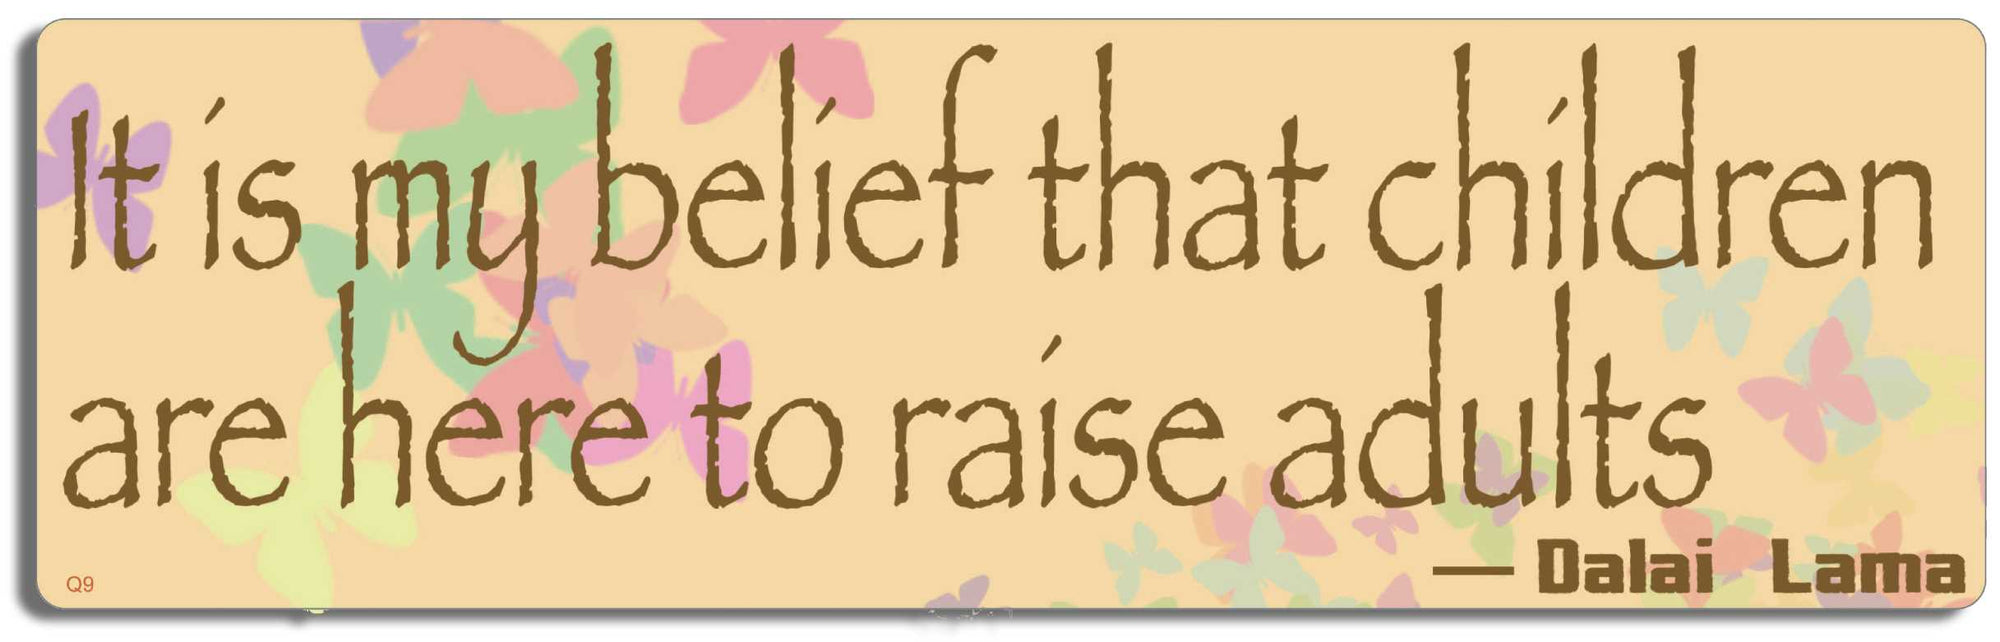 It is my belief that children are here to raise adults - Dalai Lama - 3" x 10" Bumper Sticker--Car Magnet- -  Decal Bumper Sticker-quotation Bumper Sticker Car Magnet It is my belief that children are-  Decal for carsquotation, quote